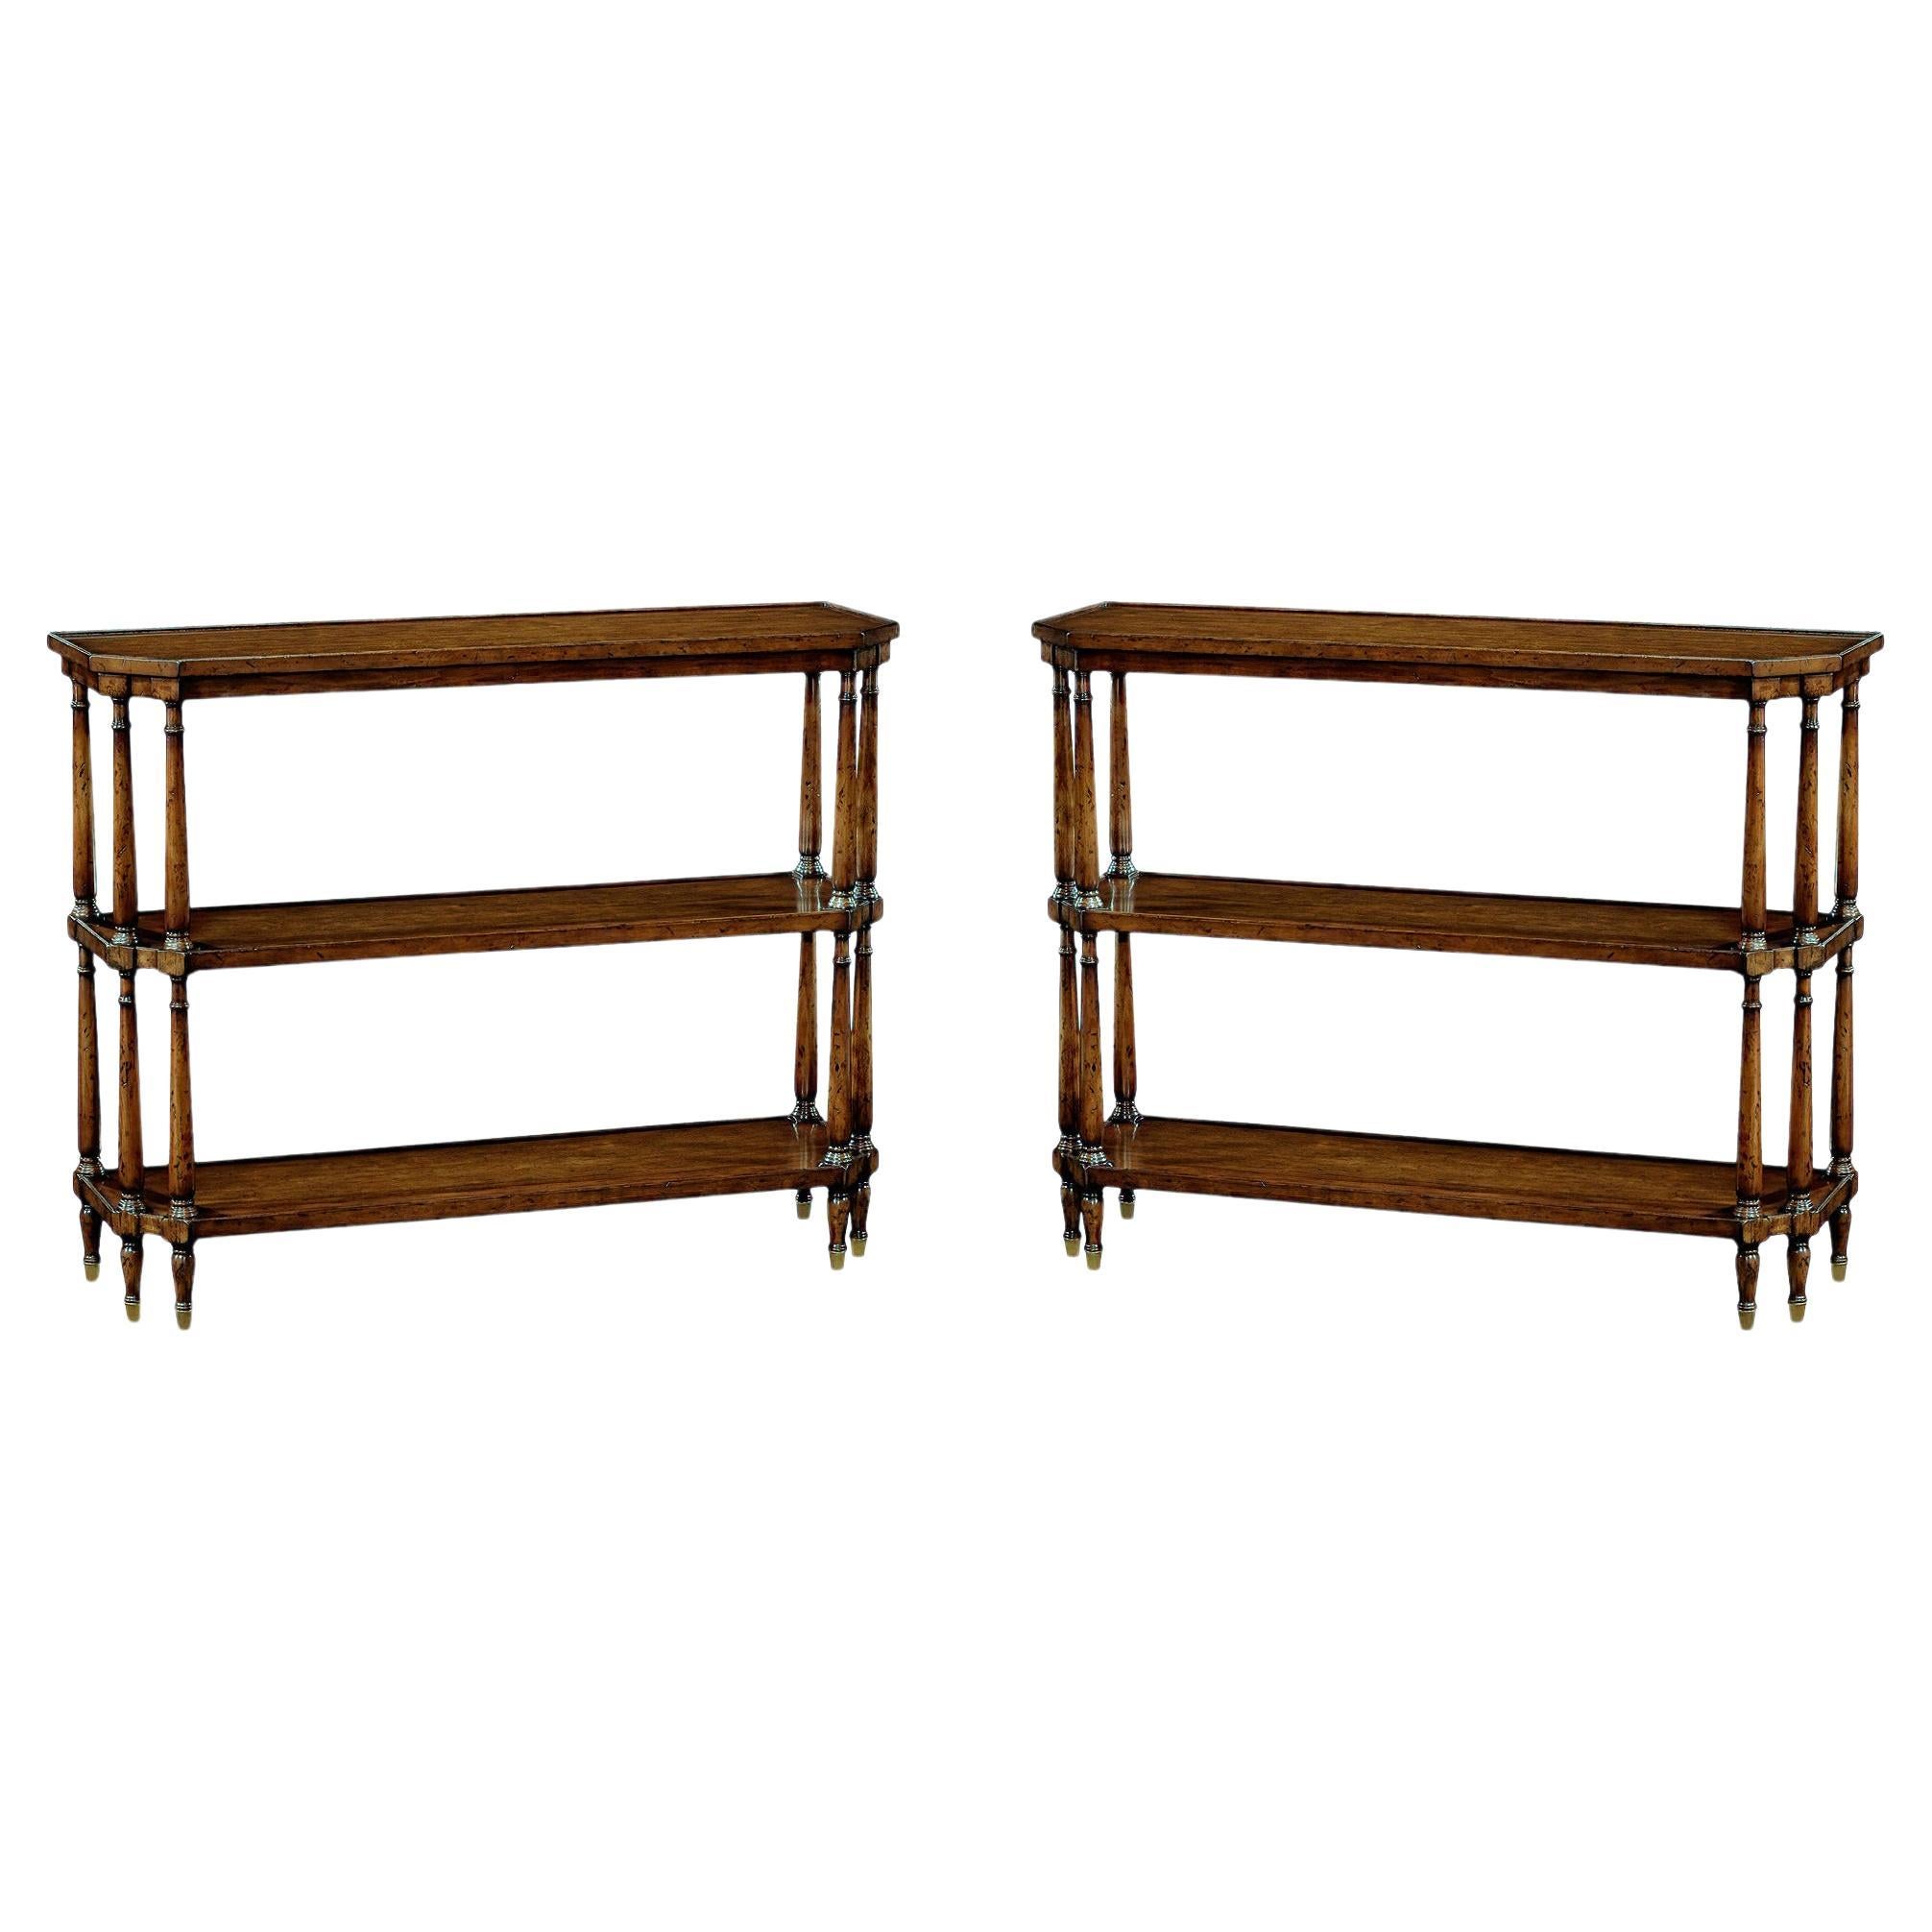 Pair of English Country Walnut Console Tables